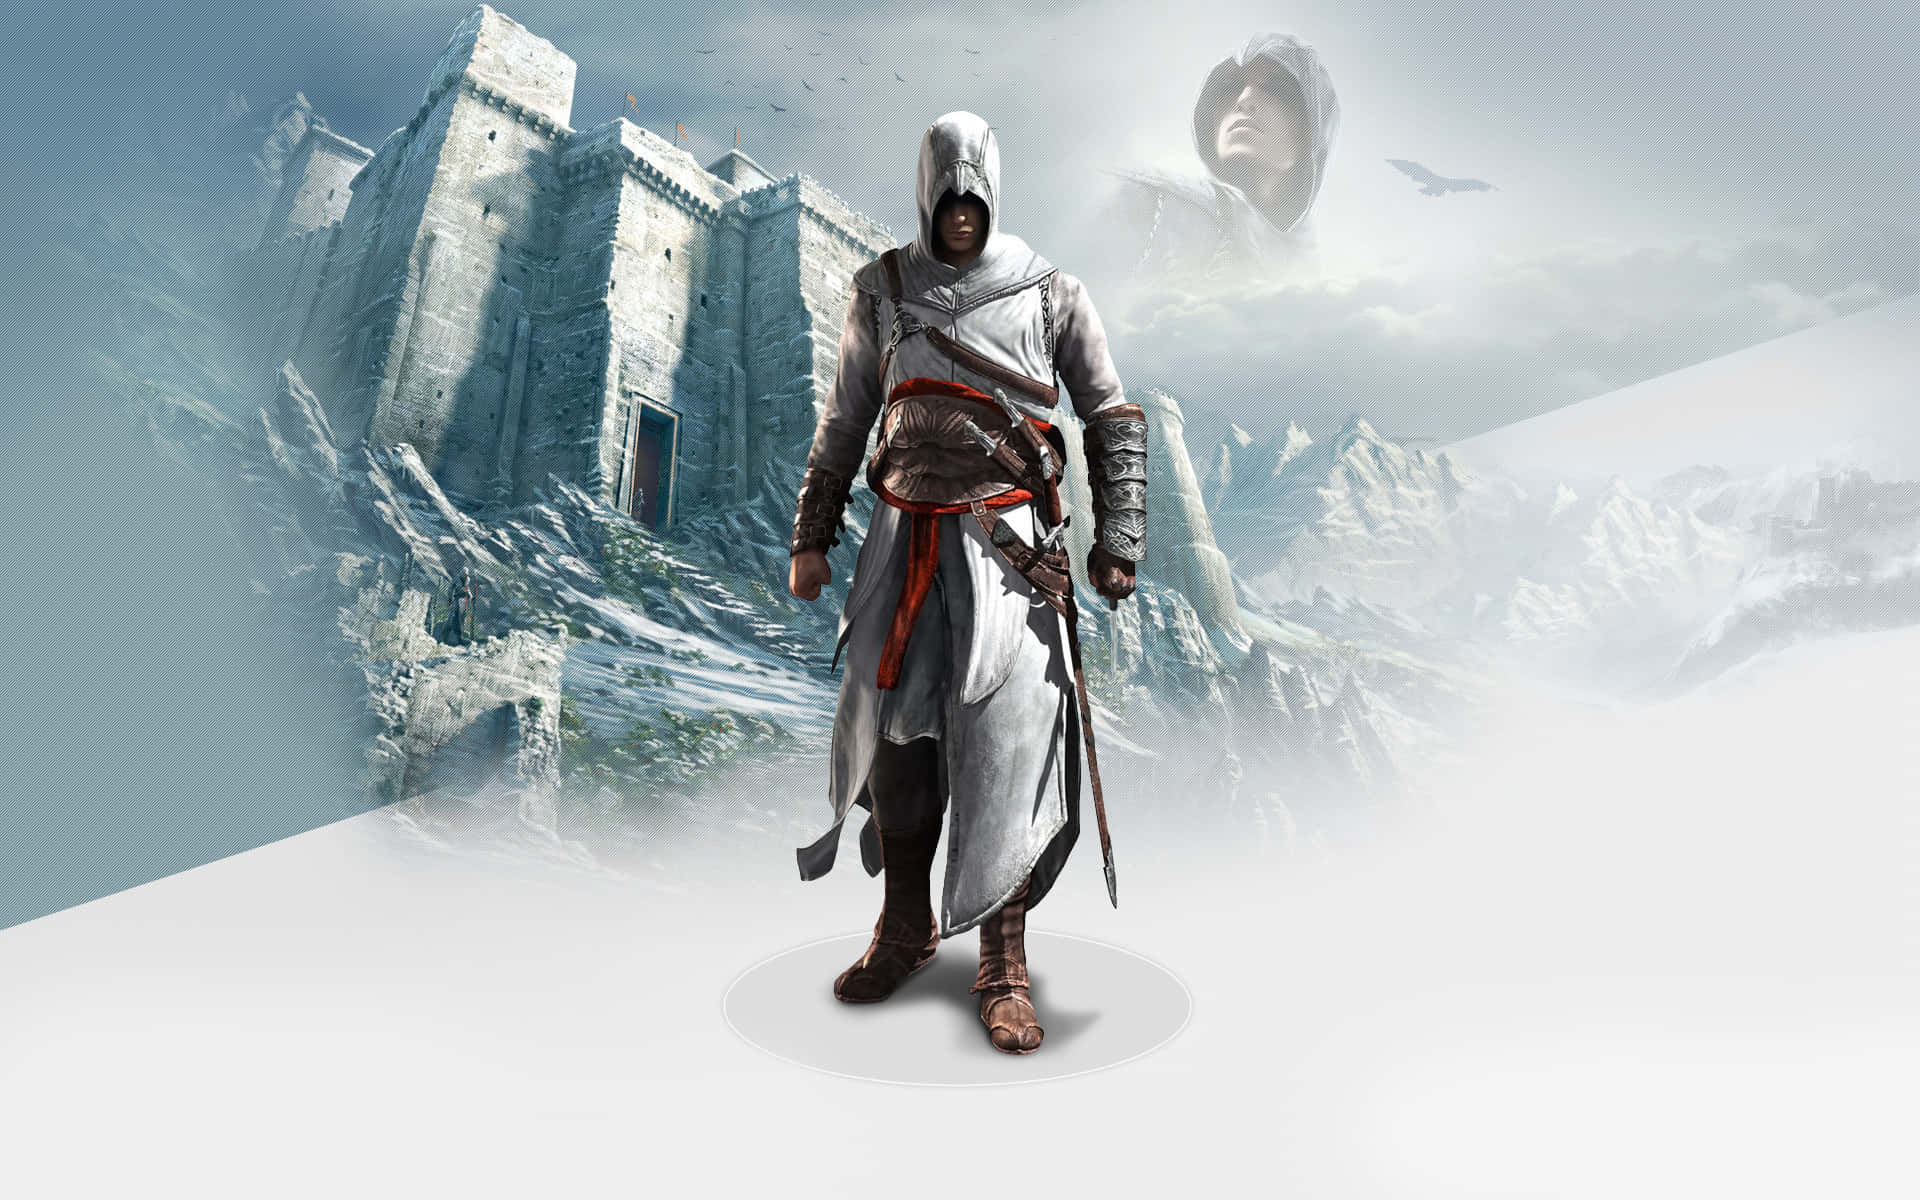 Assassin's Creed Altair in Action Wallpaper